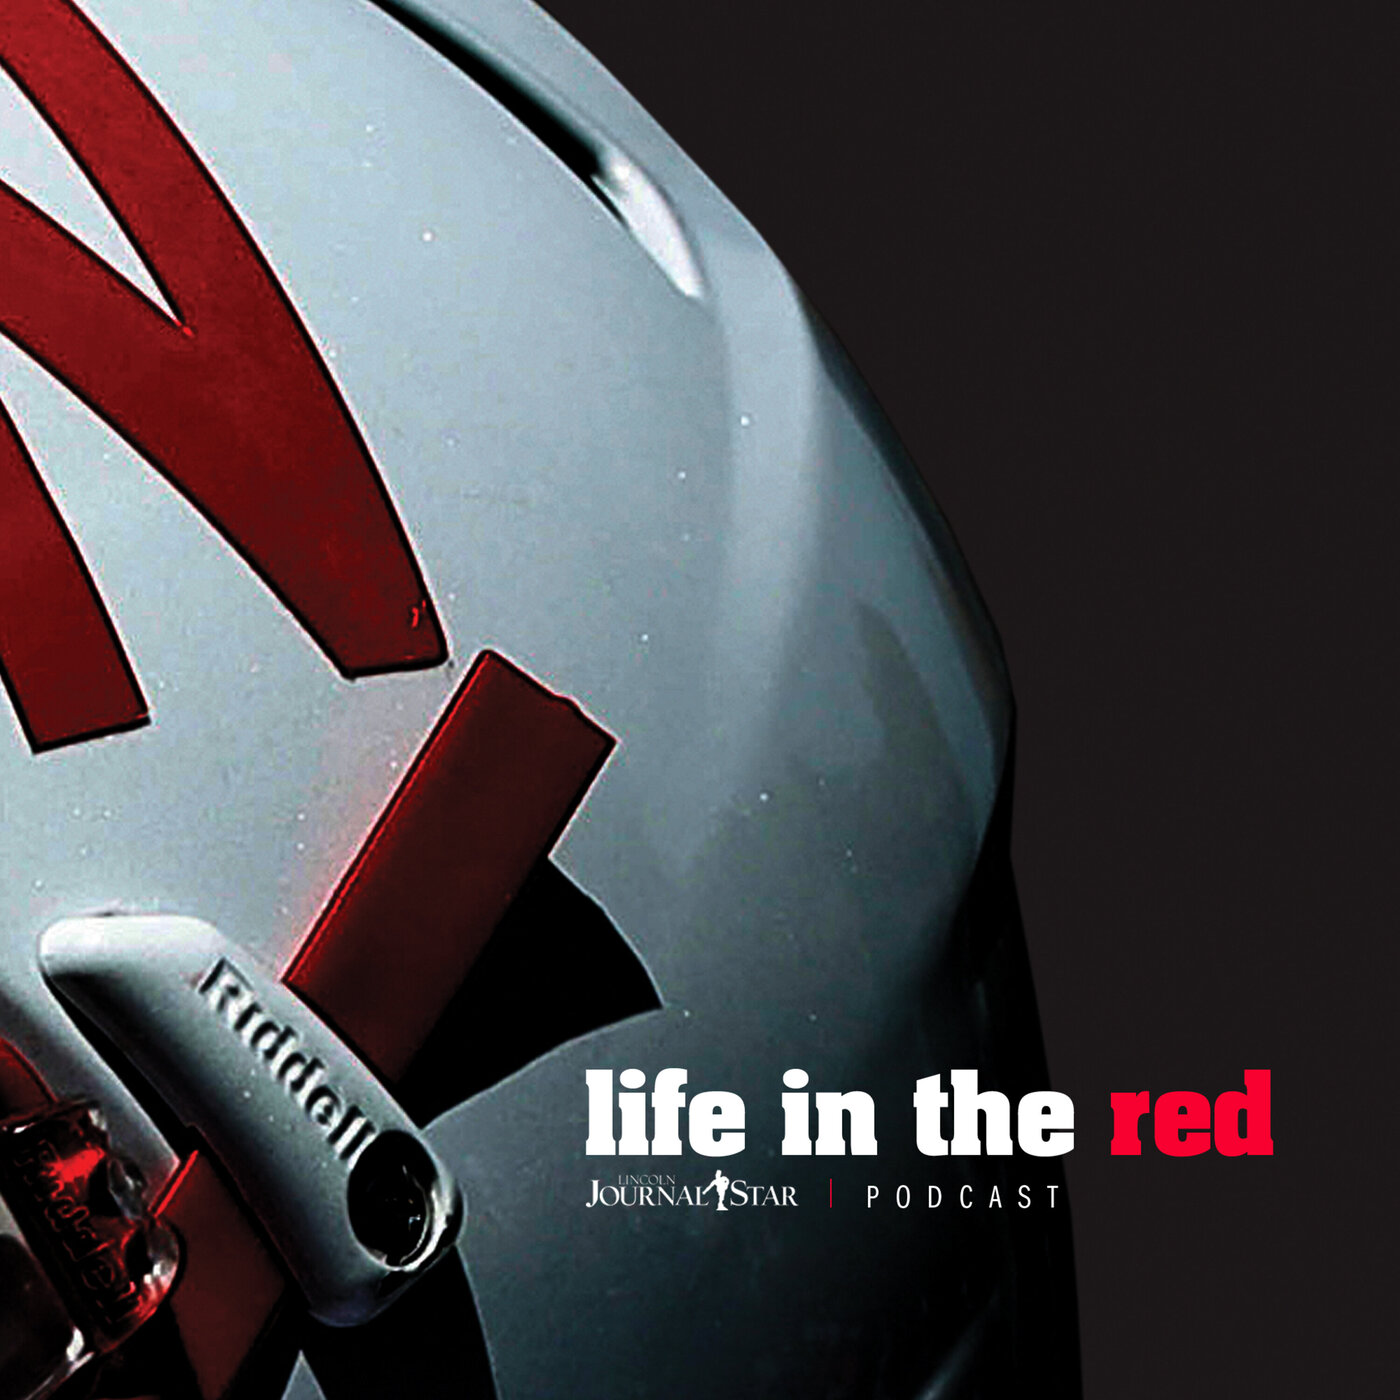 Life in the Red Podcast: A rare slice of optimism